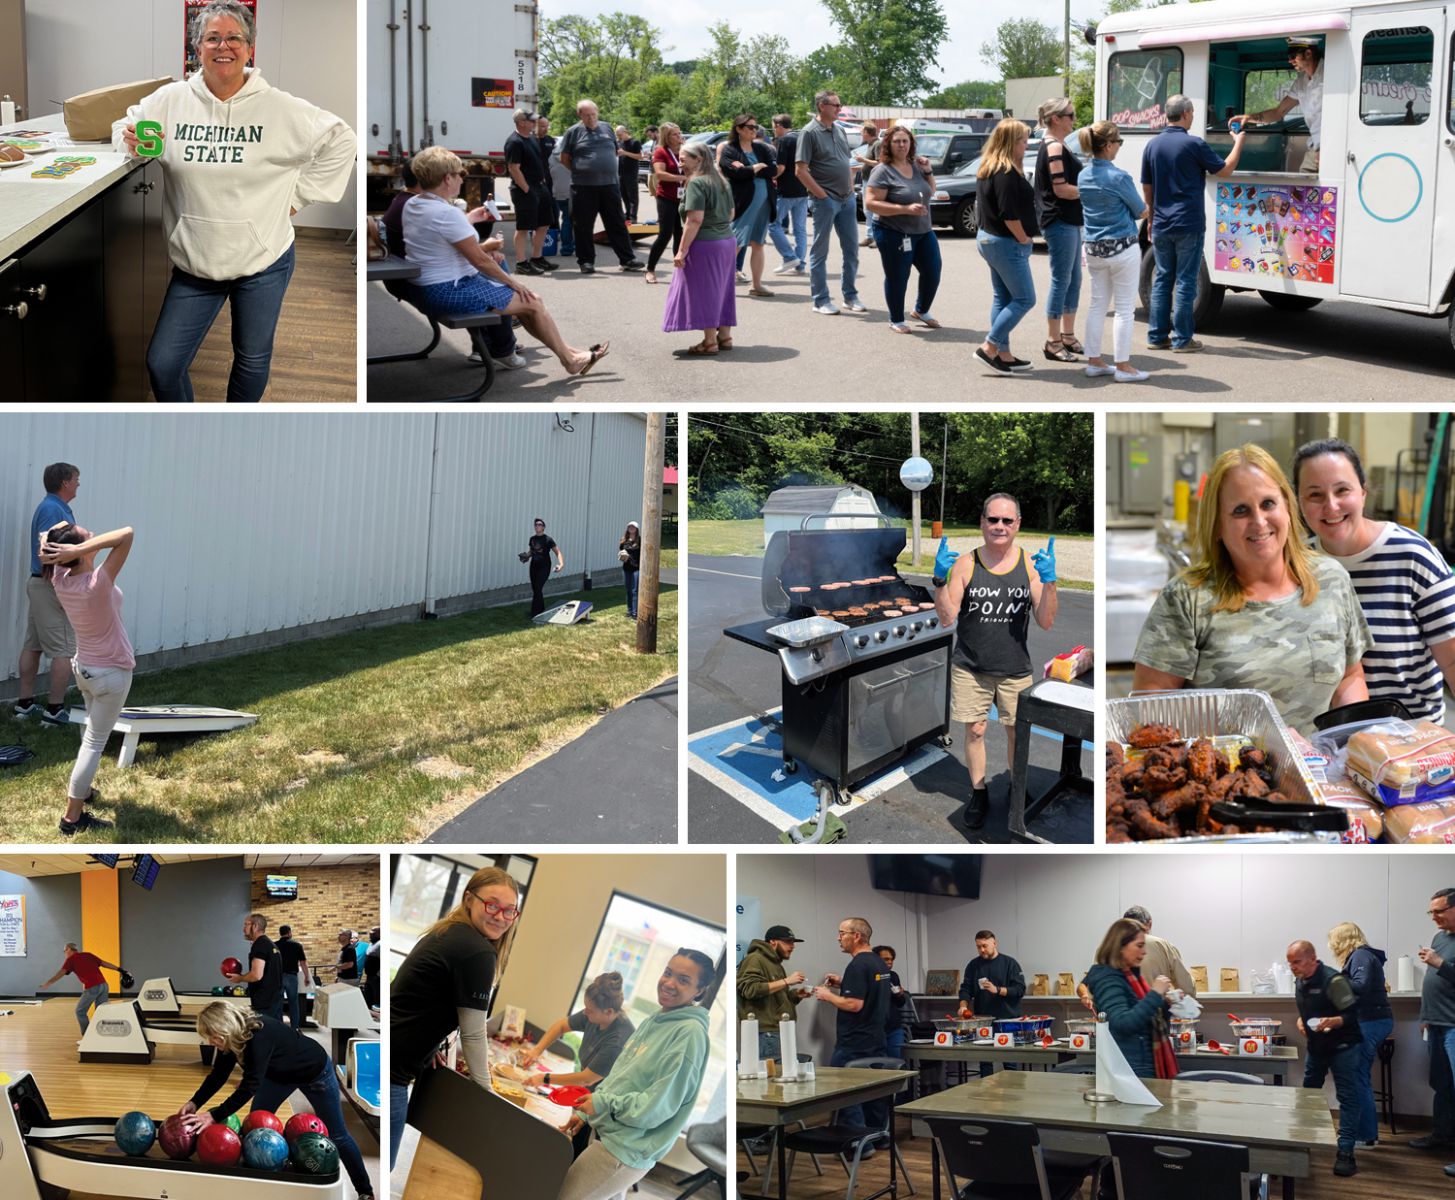 Some of our most popular internal events include MSU vs. U of M day, commemorative days events such as PI Day and a visit from an ice cream truck, our two summer barbecues and a fall bowling event.